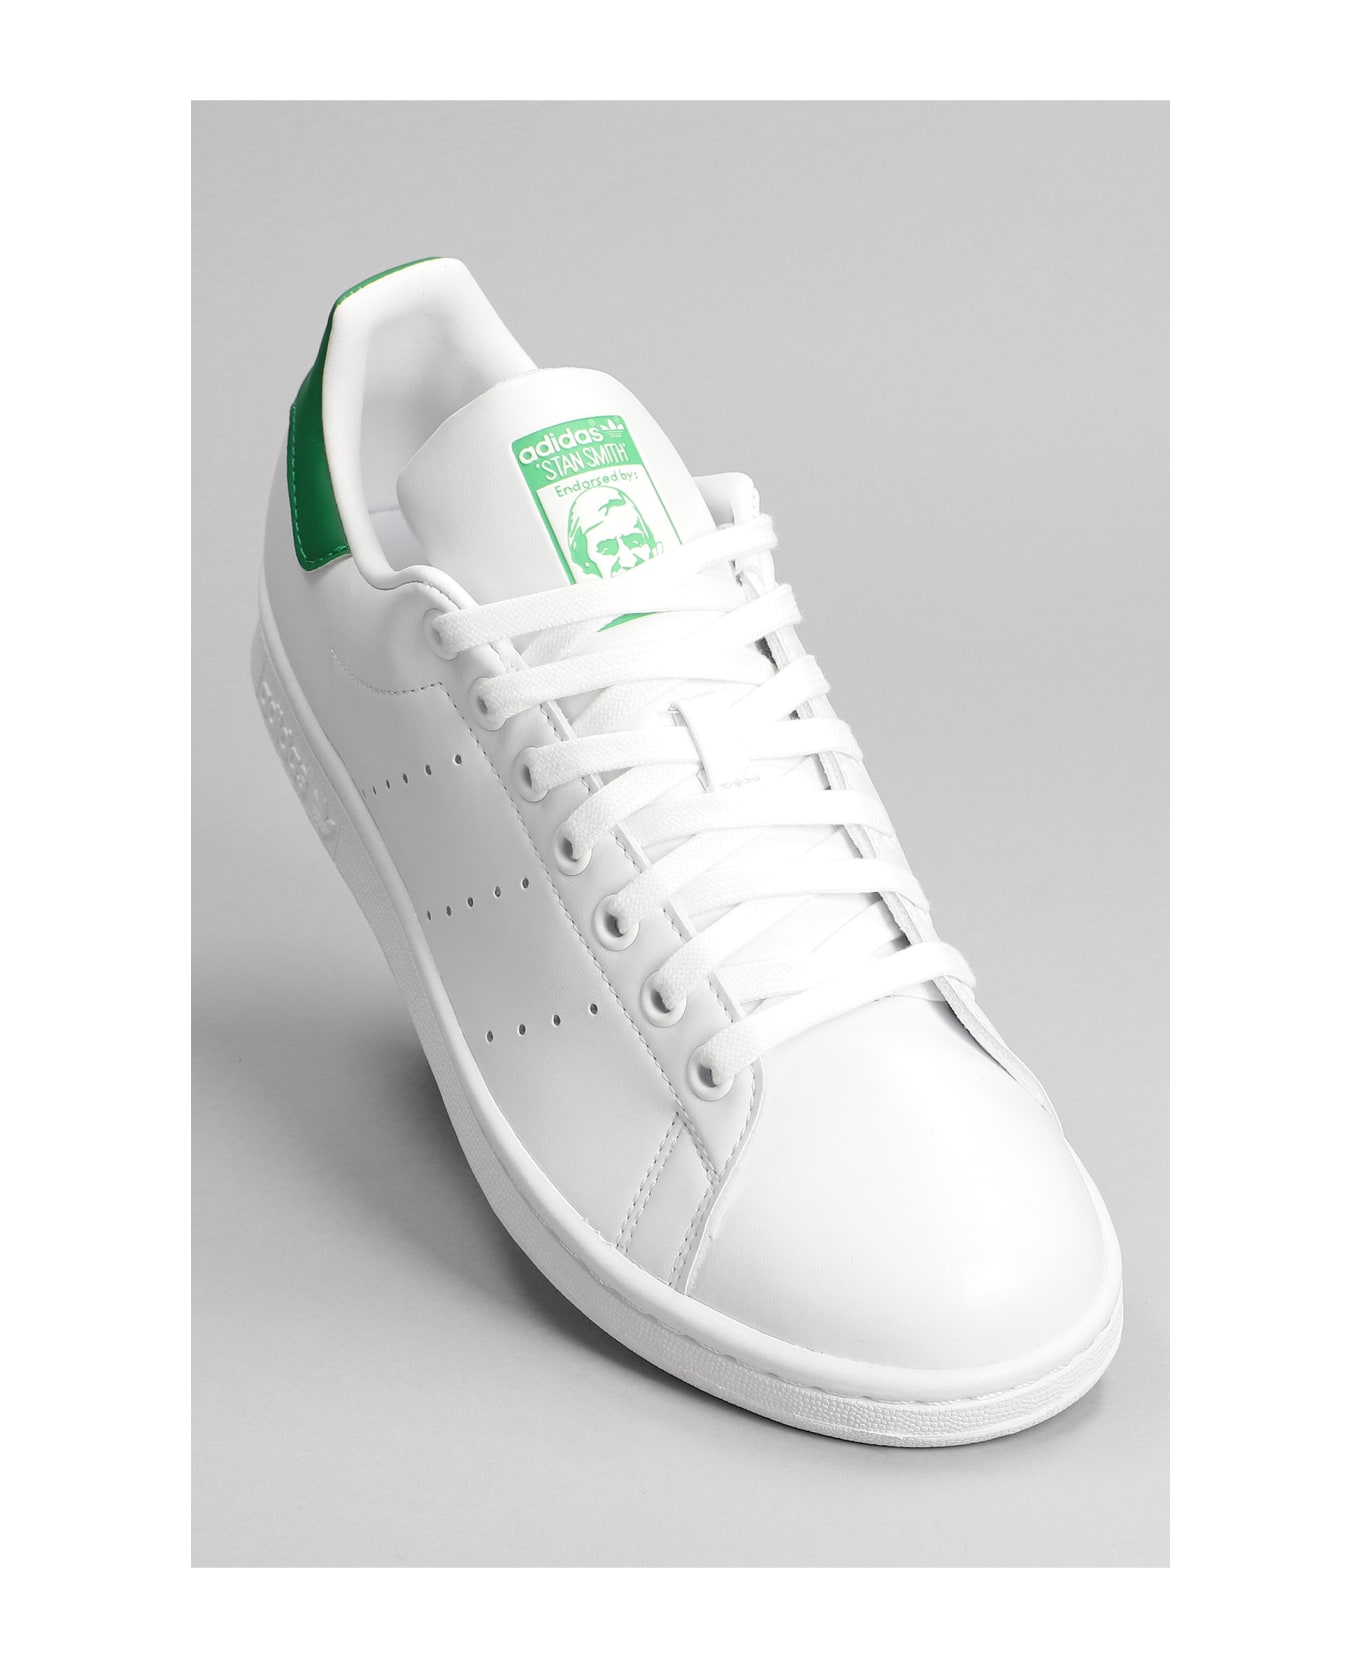 Adidas Stan Smith Sneakers In White Leather - White and green